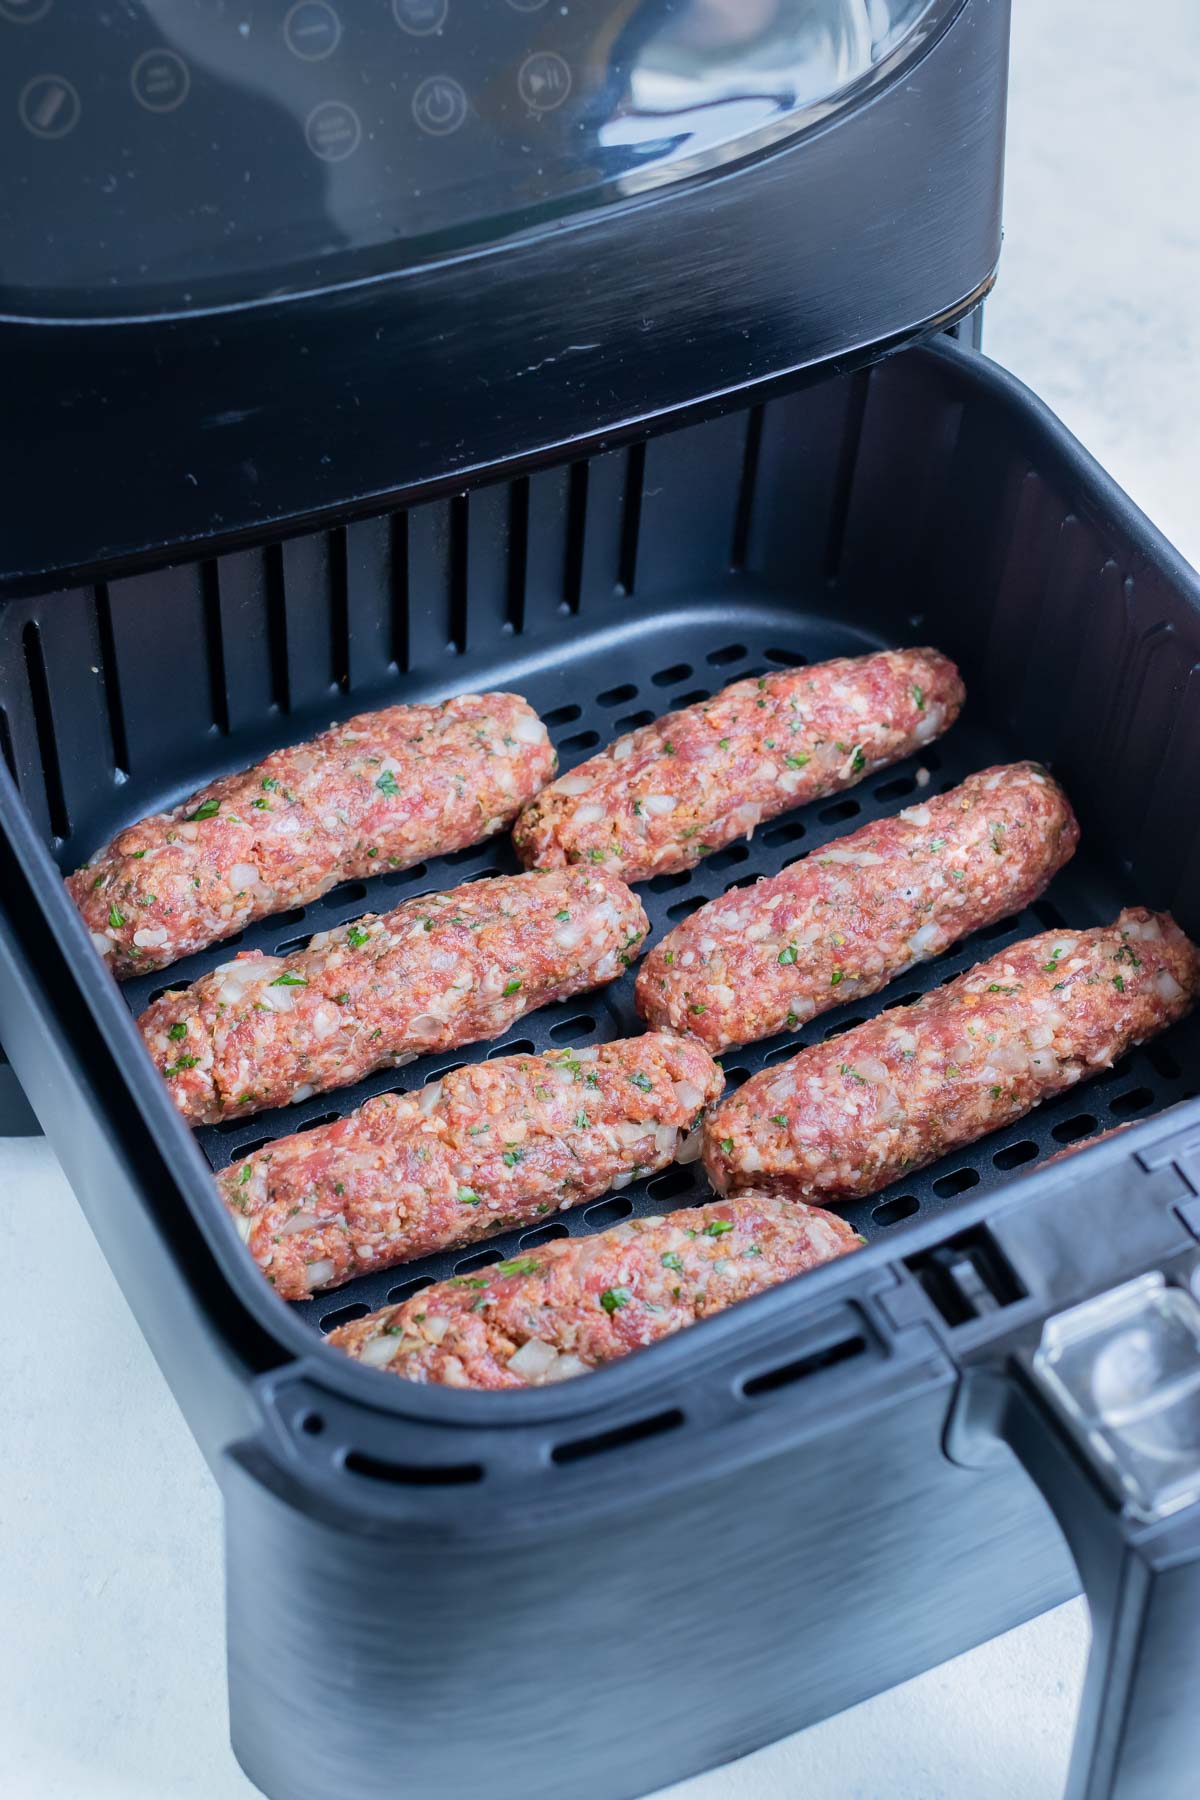 The Lamb Kebabs are cooked in an air fryer.